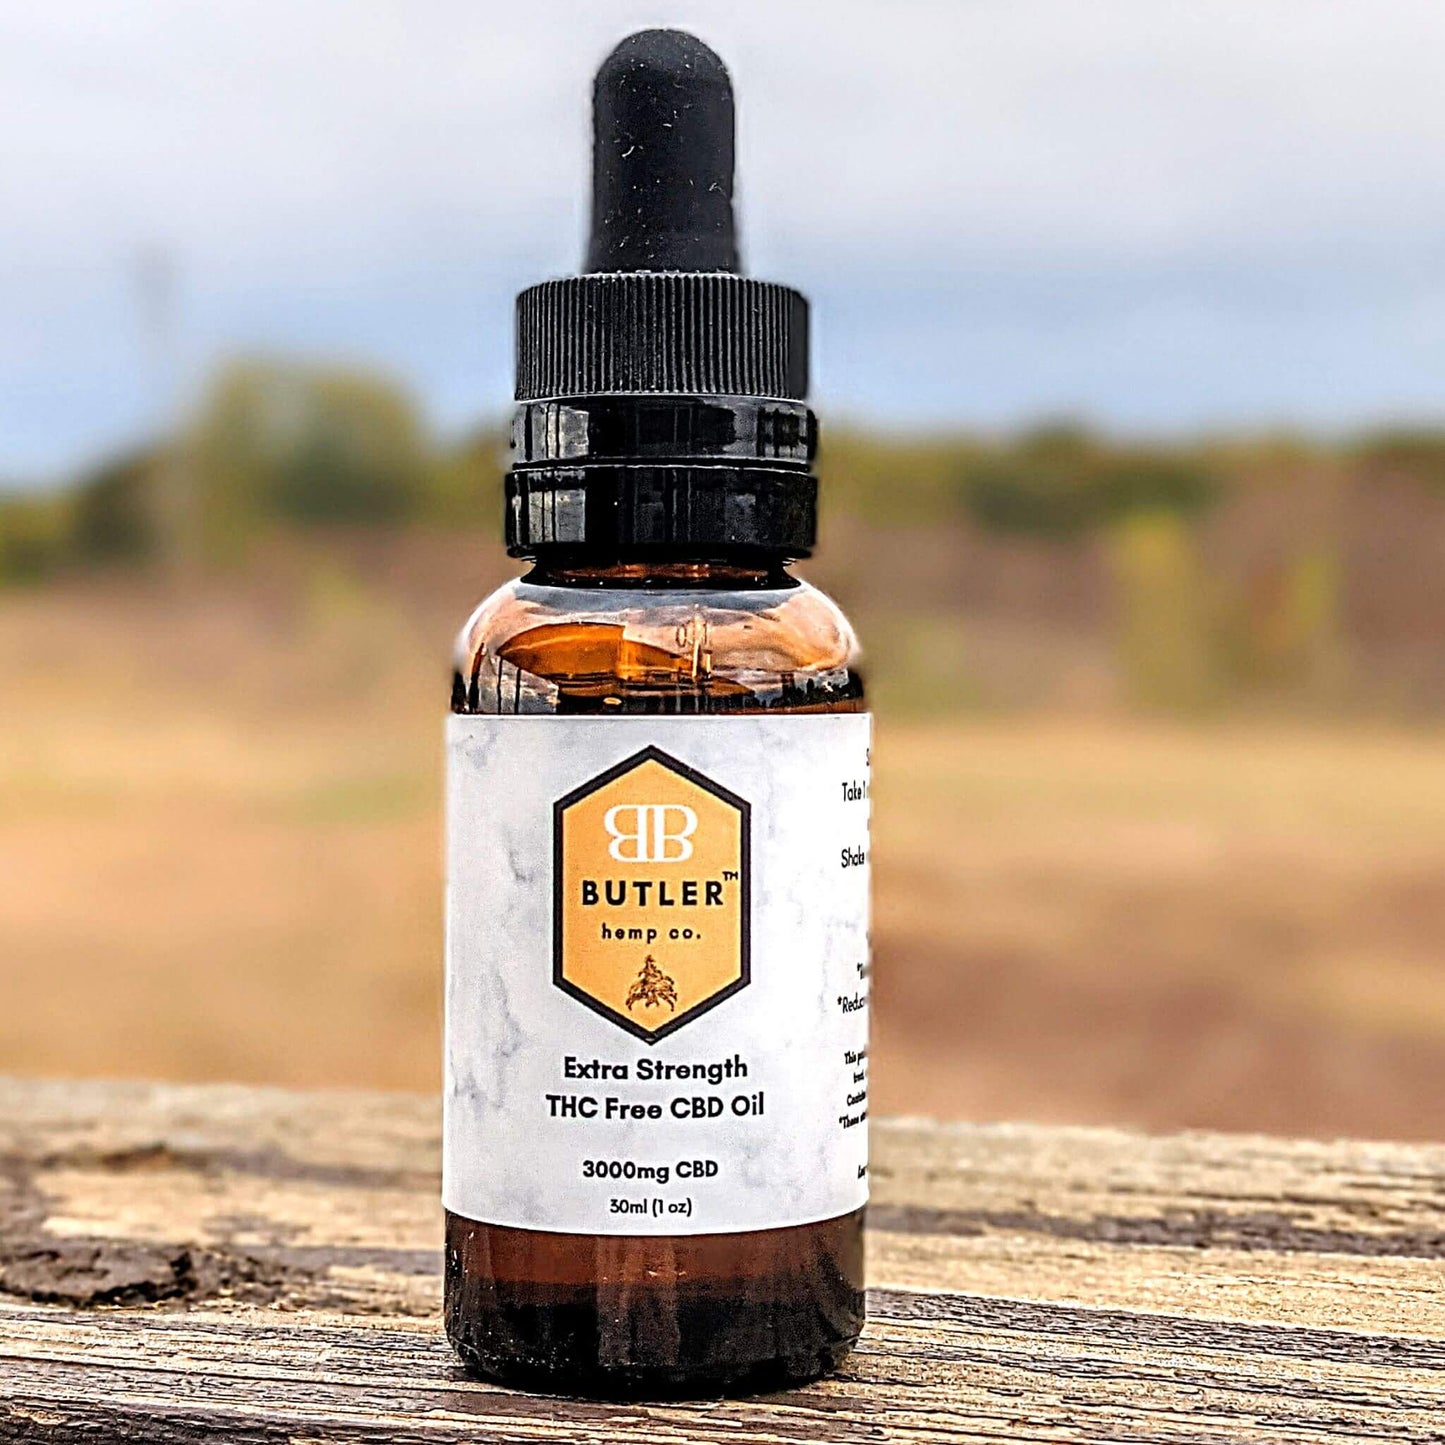 THC free CBD oils deliver a concentrated and pure dose of potent CBD in each dose. CBD has shown to help fight inflammation and pain, can potentially help with focus and mental clarity, and may even help improve sleep cycles if taken in the evenings. 